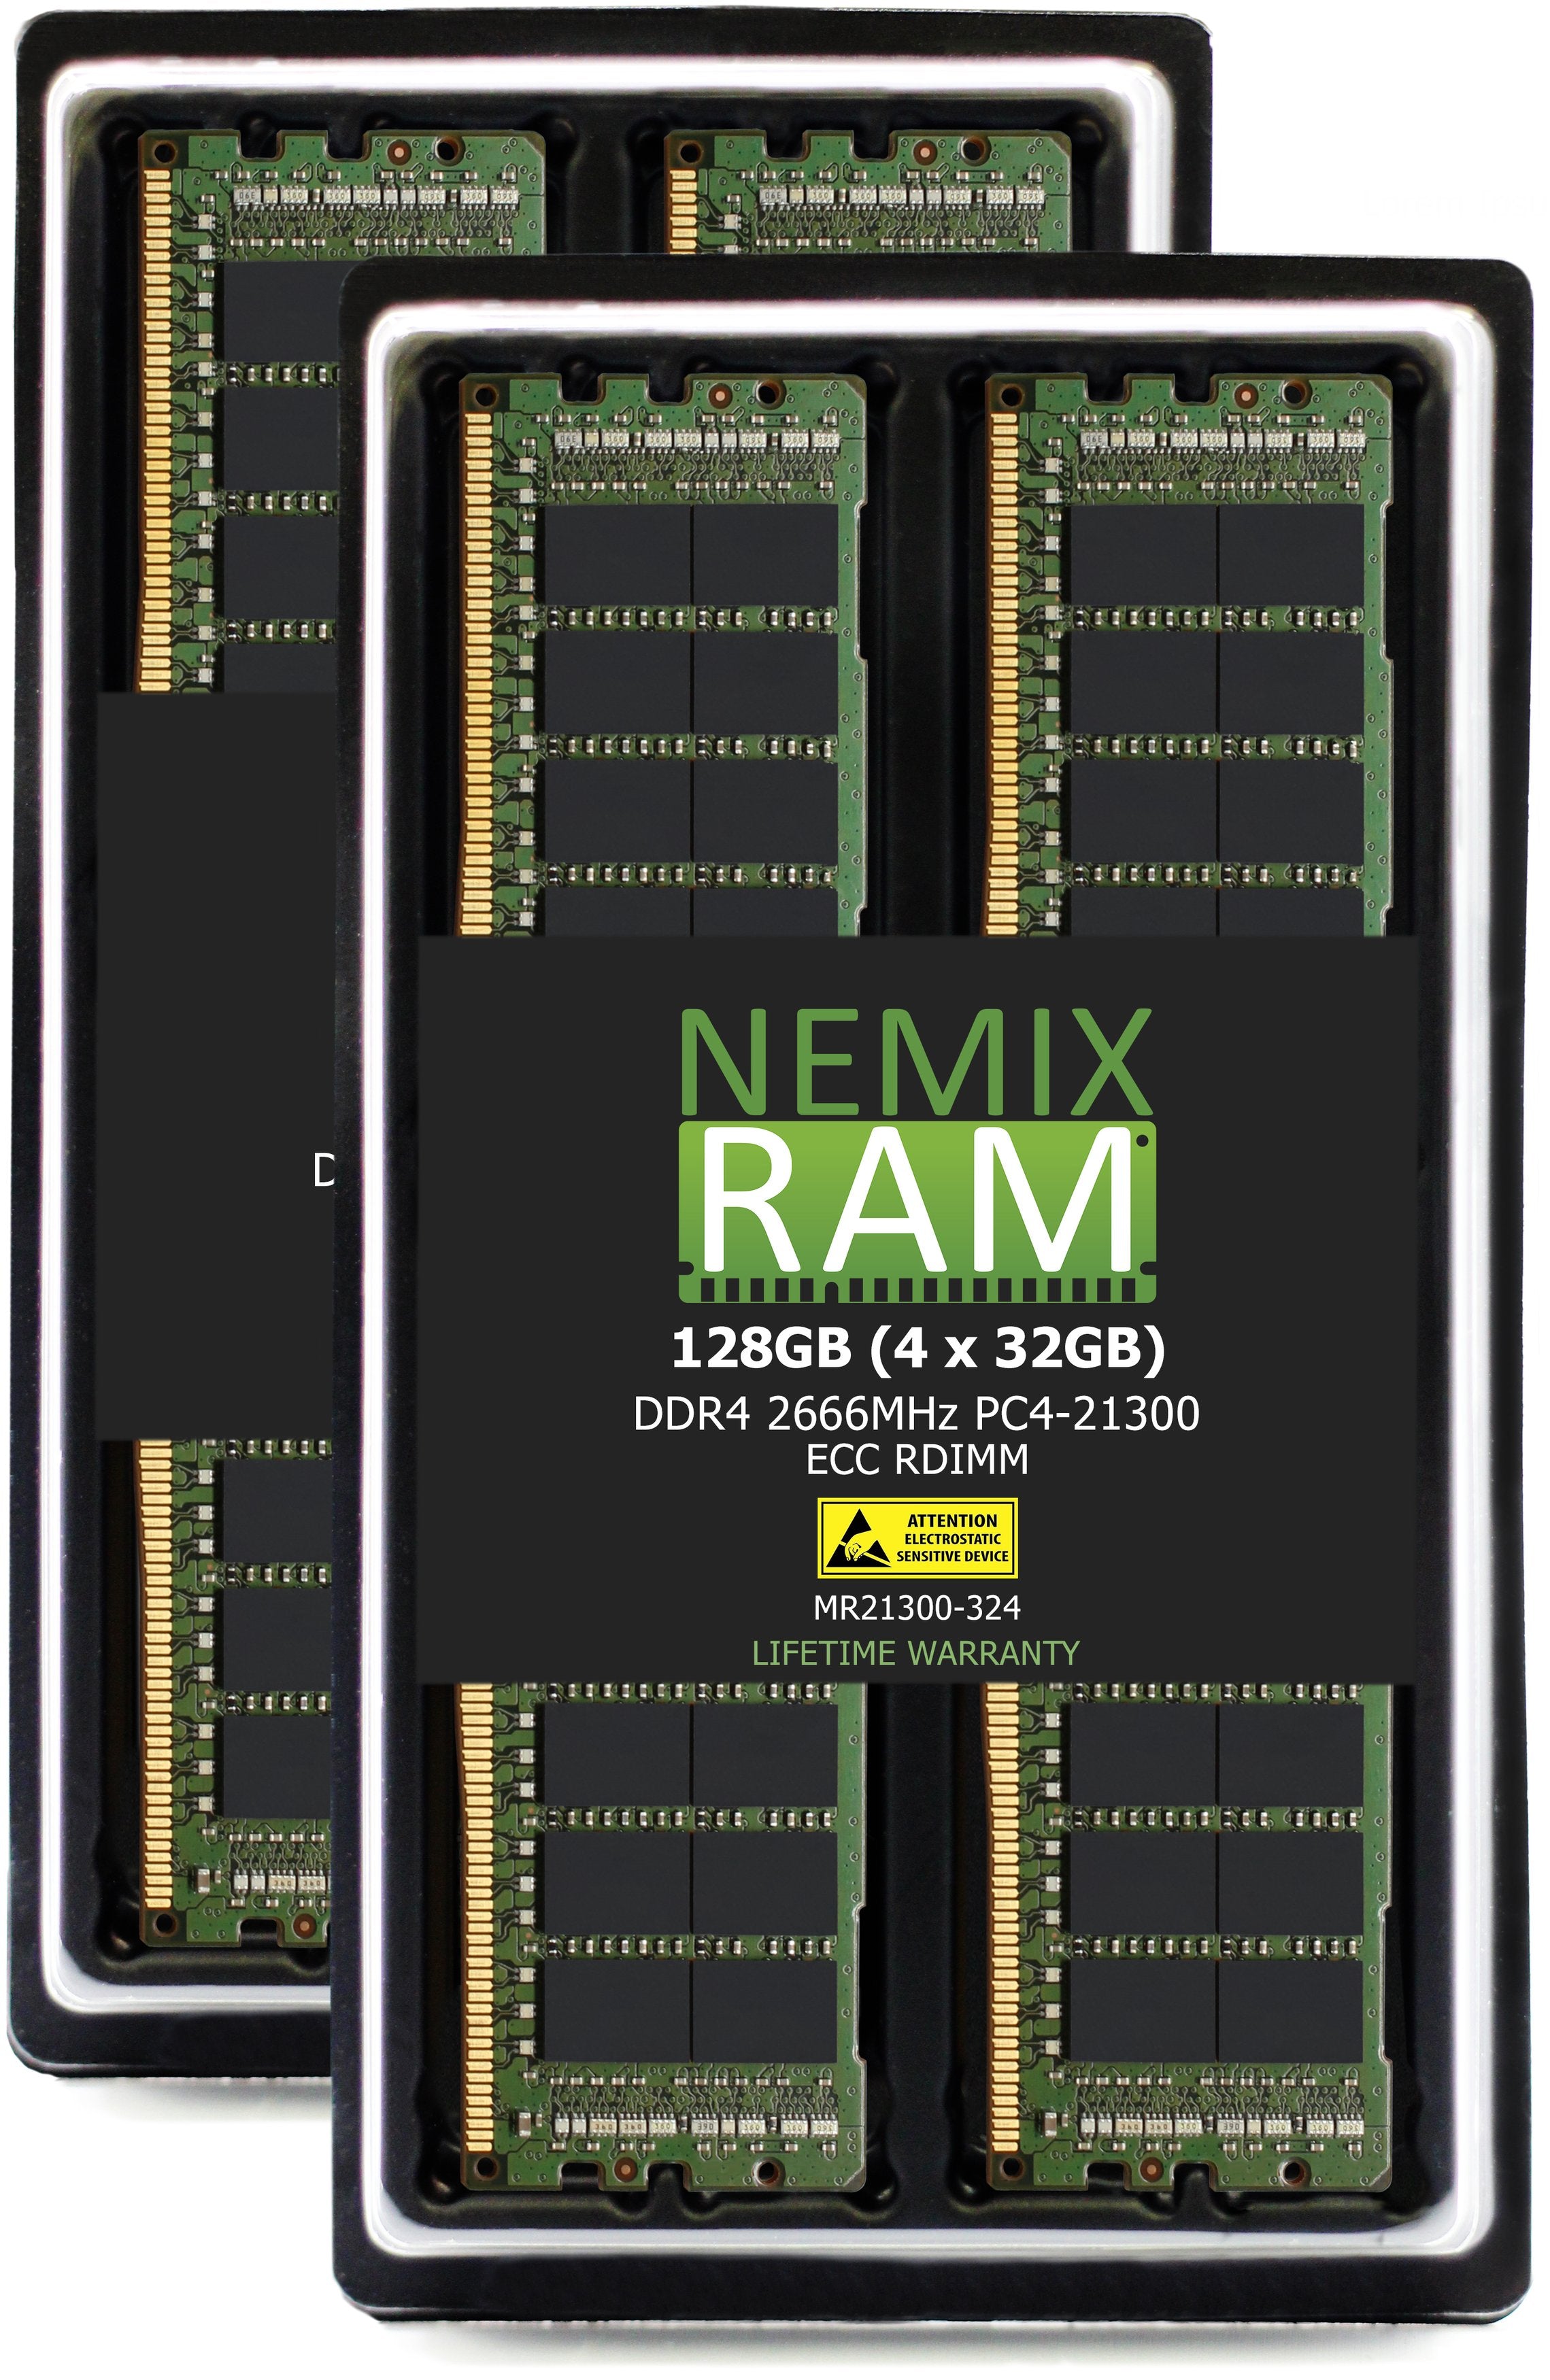 DDR4 2666MHZ PC4-21300 RDIMM Compatible with Synology D4RD-2666-32G